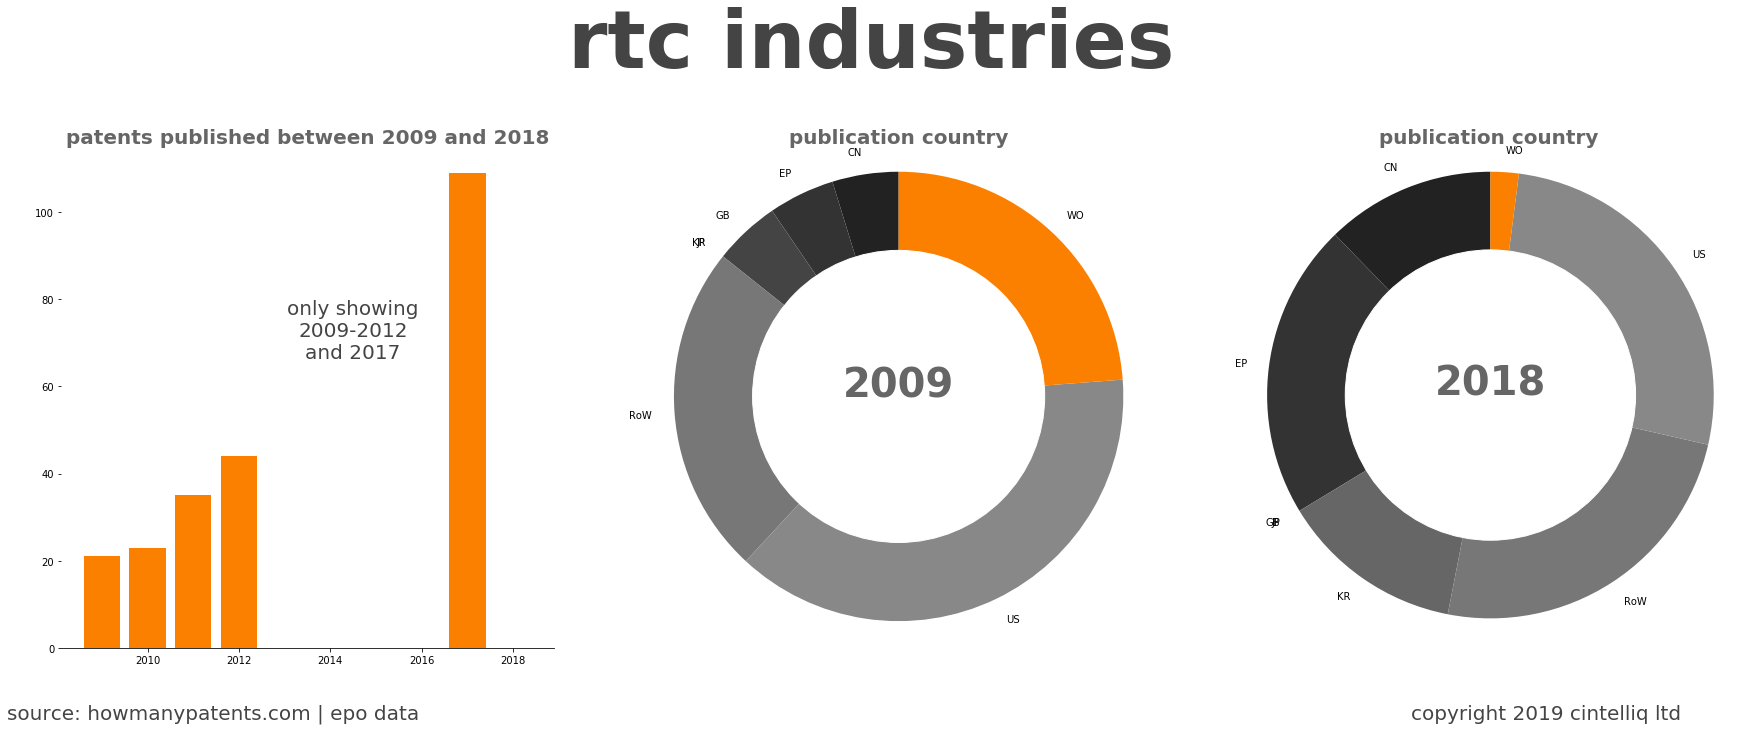 summary of patents for Rtc Industries